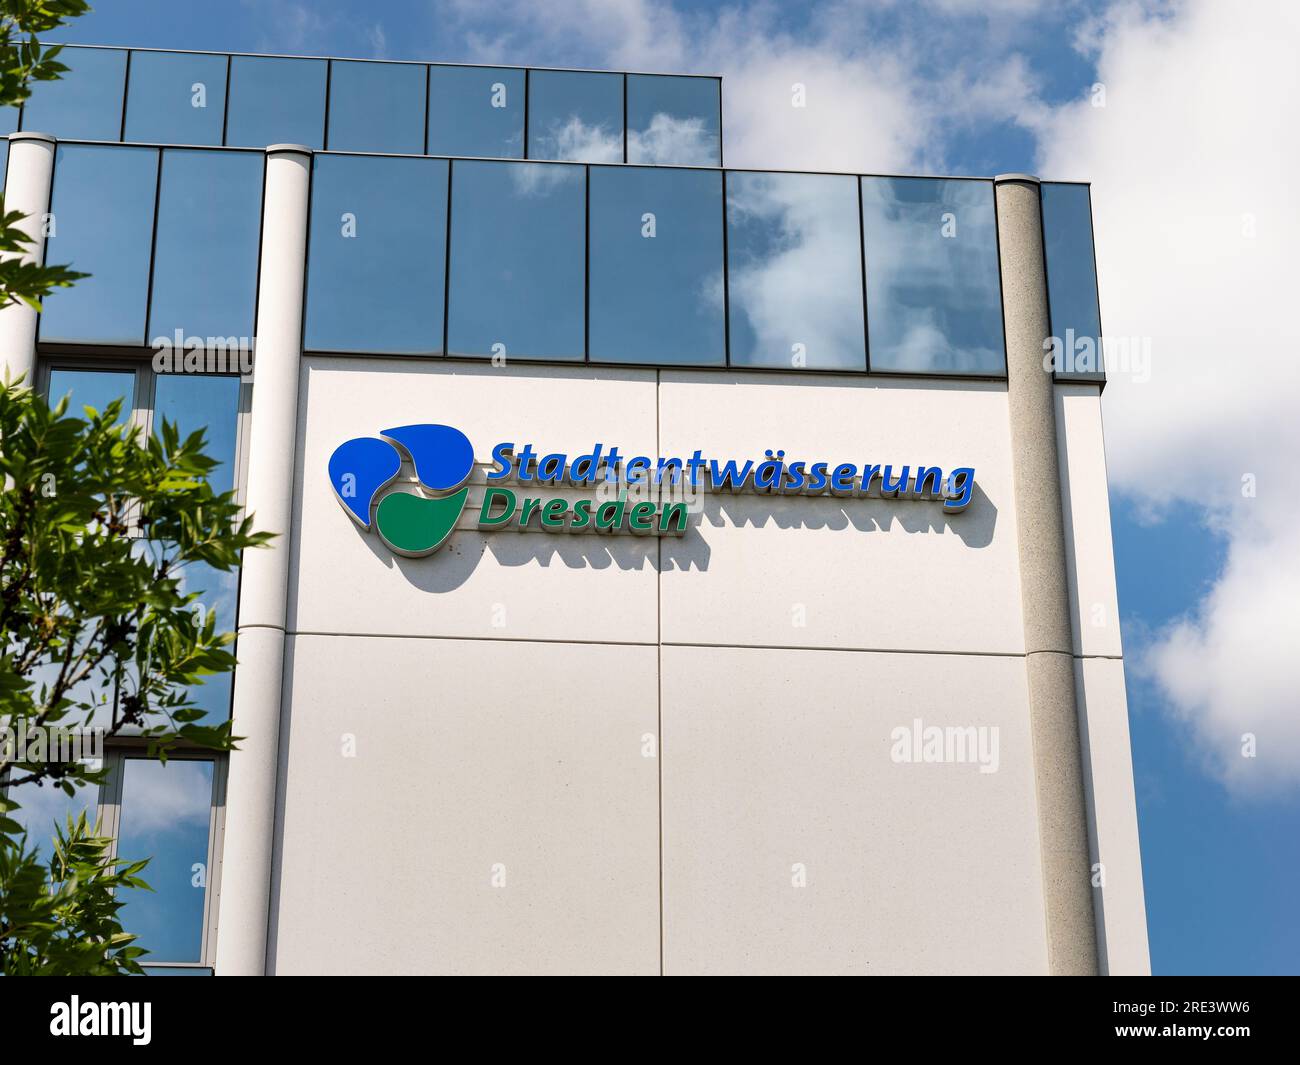 Stadtentwässerung (drainage service) logo sign on an office building exterior. The company treats waste water and operates the public sewer system. Stock Photo